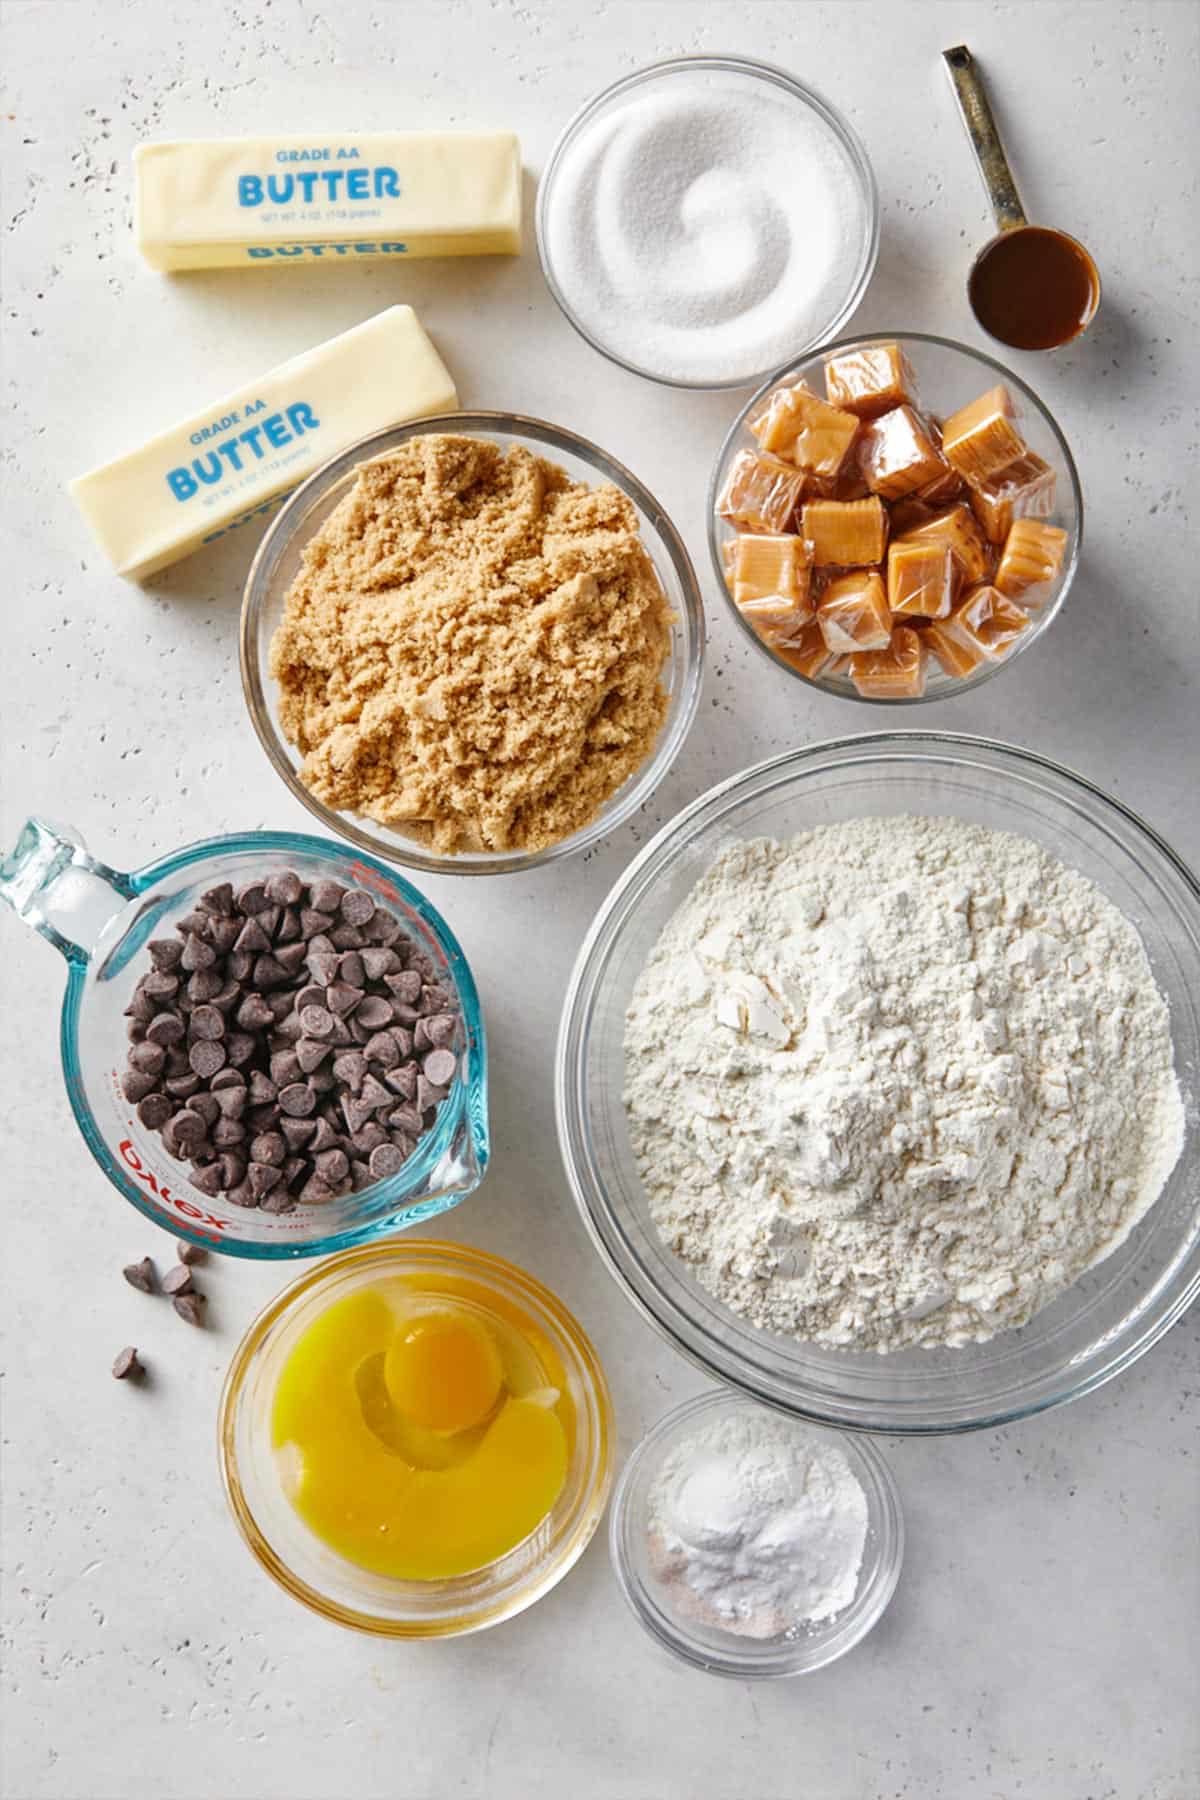 Ingredients to make salted caramel cookies with chocolate chips on the table.